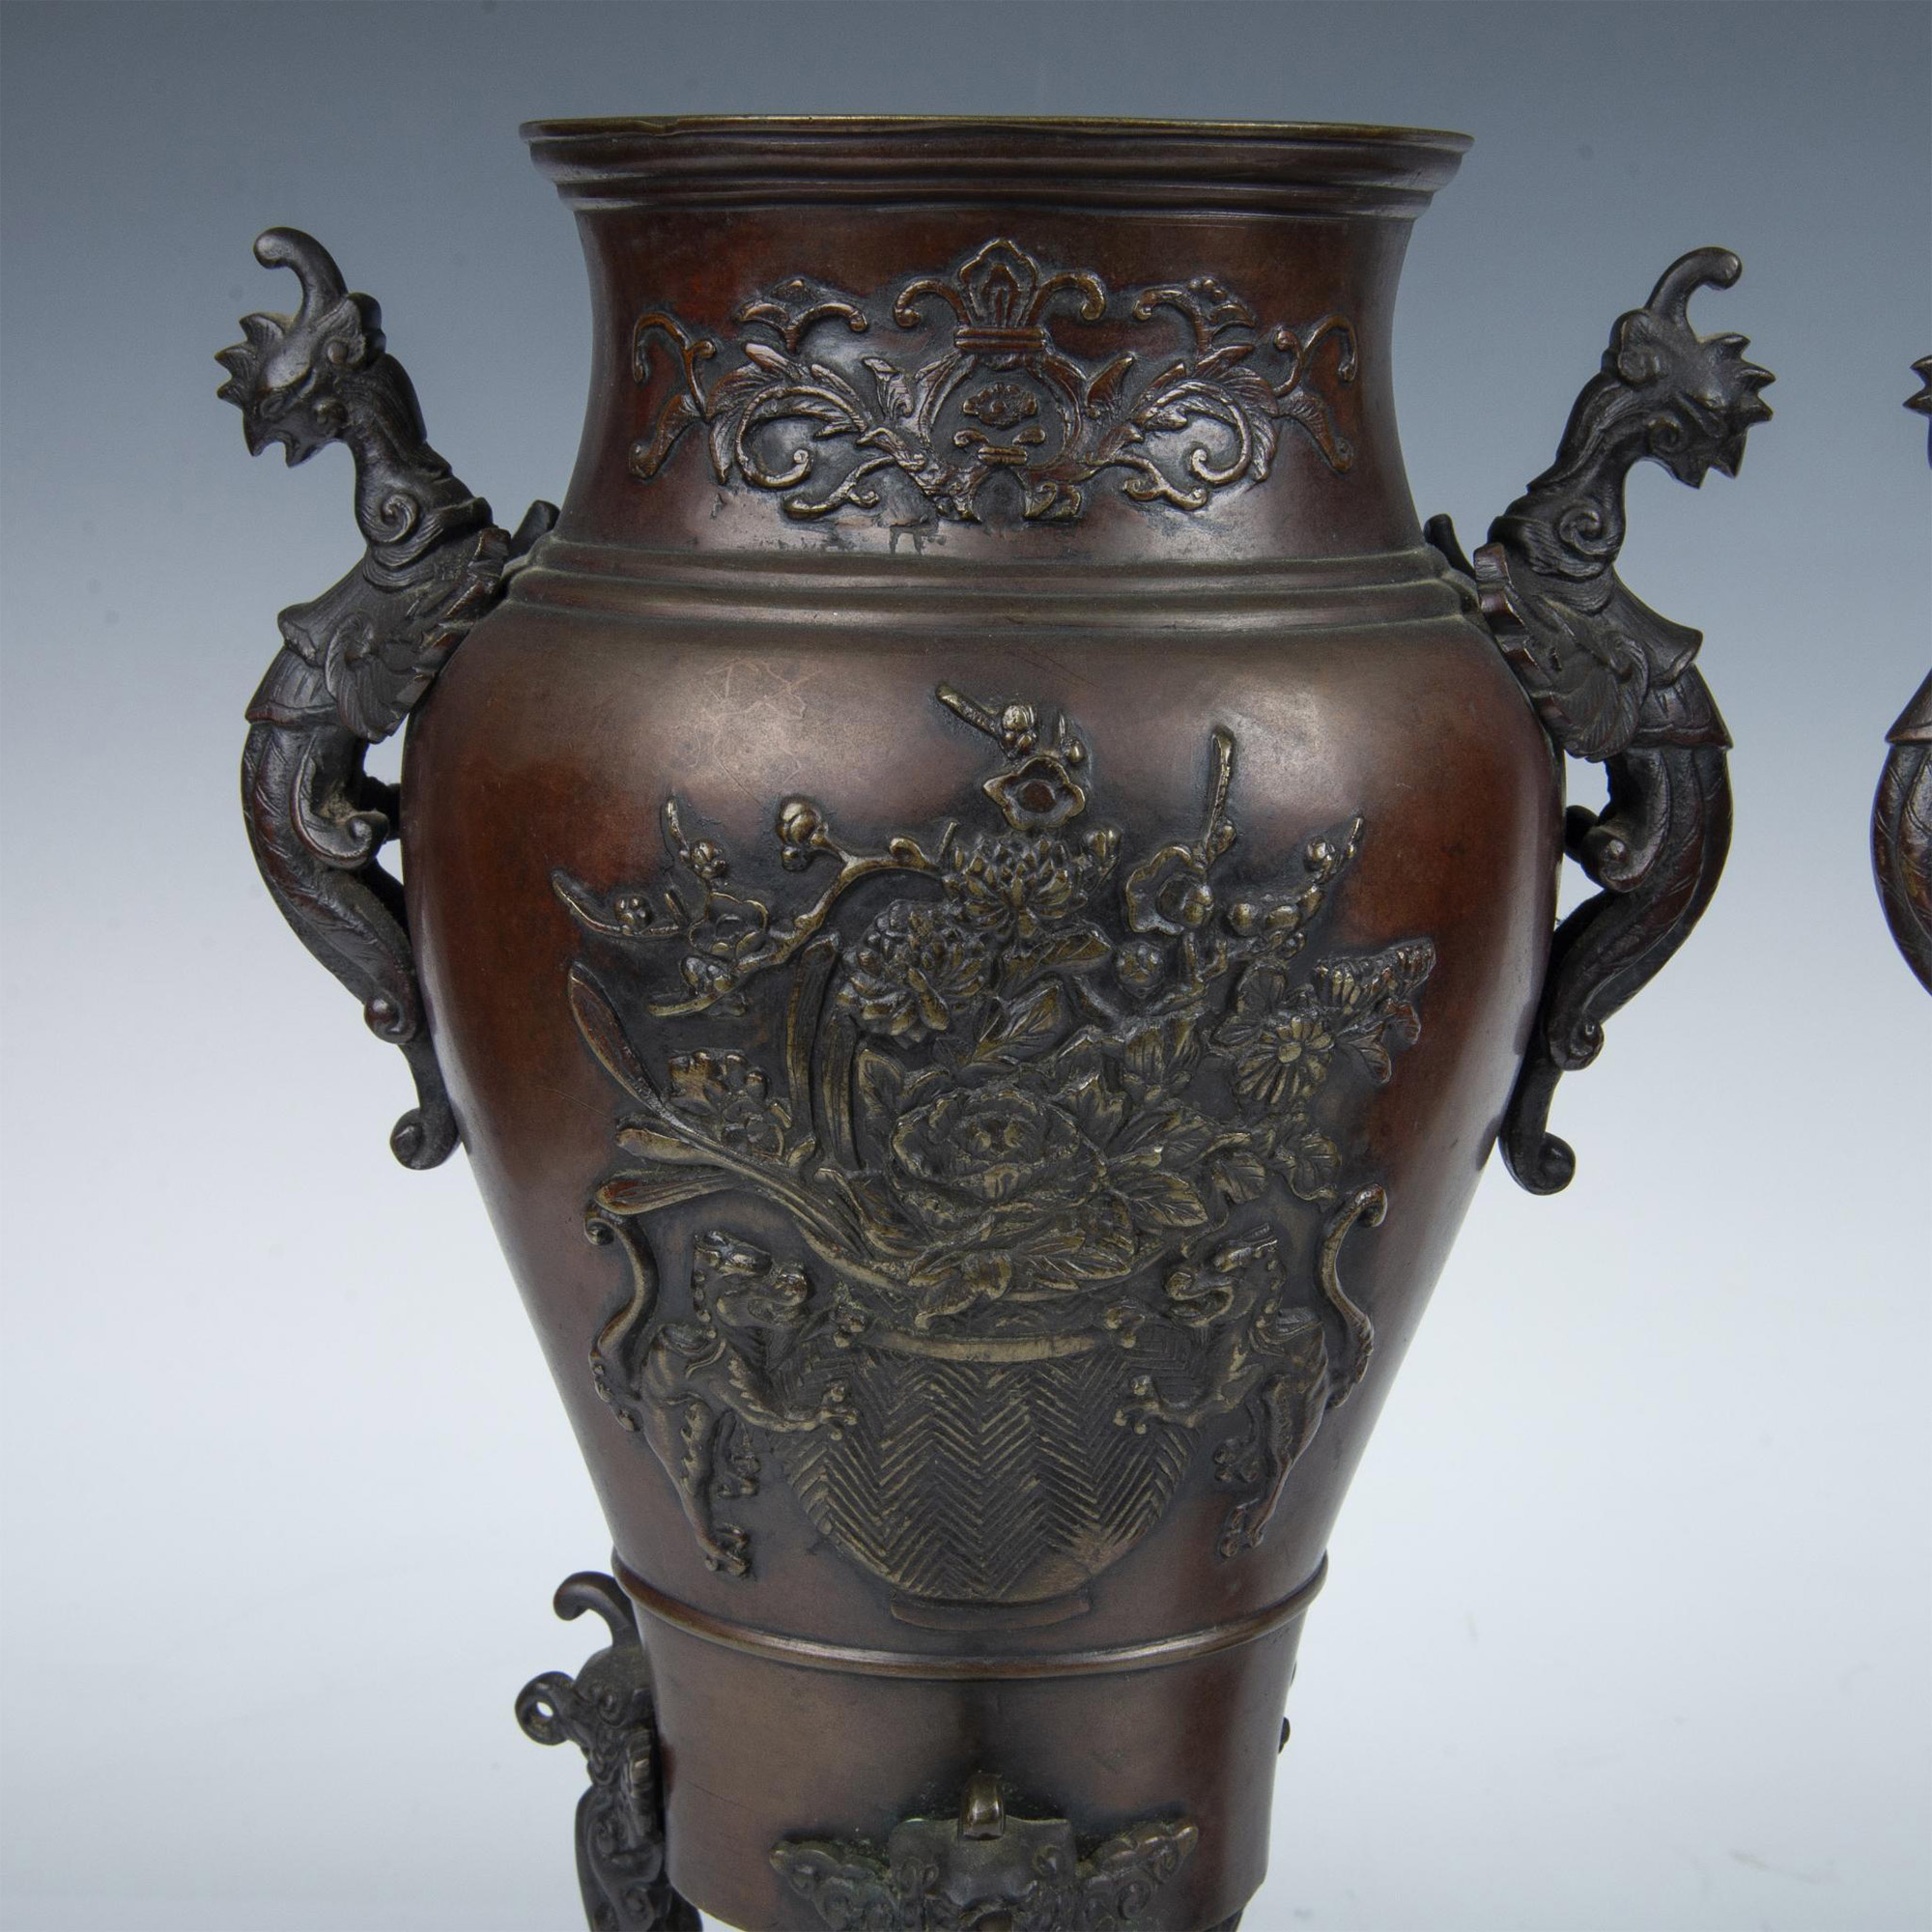 Pair of Antique Japanese Bronze Urns with Griffins Designs - Image 4 of 7